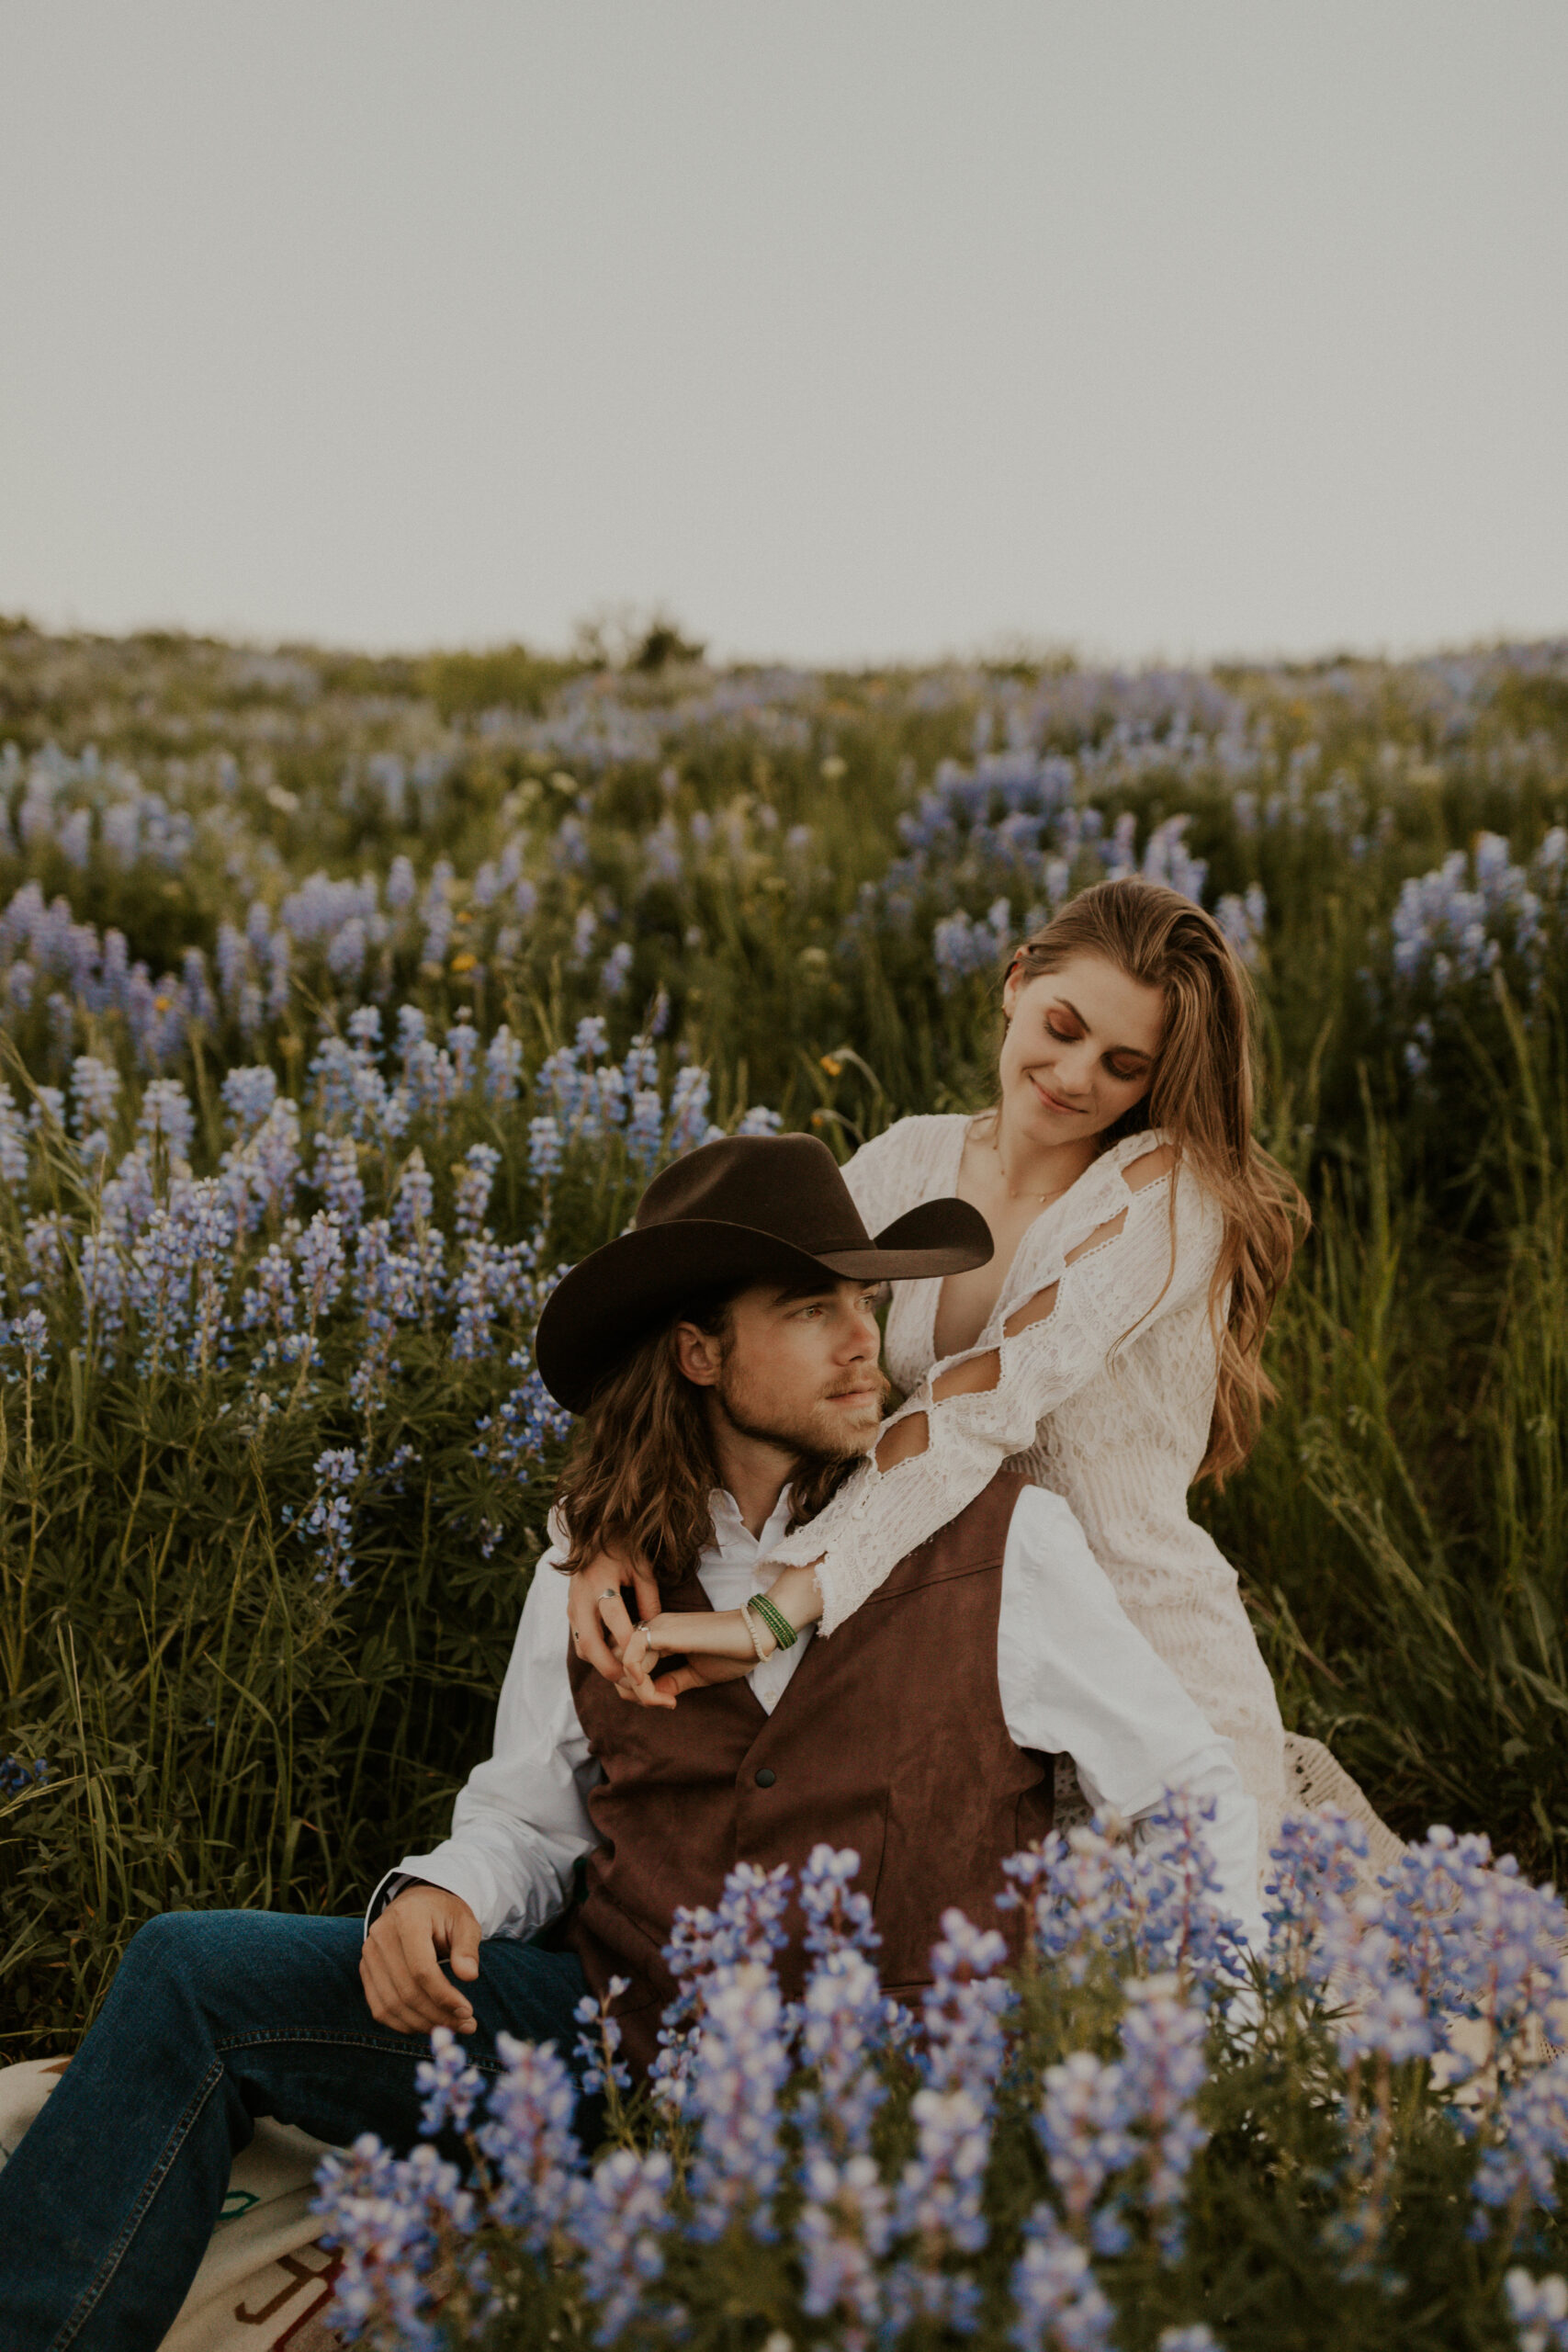 Western elopement in Crested Butte, Colorado with wildflowers and horses.